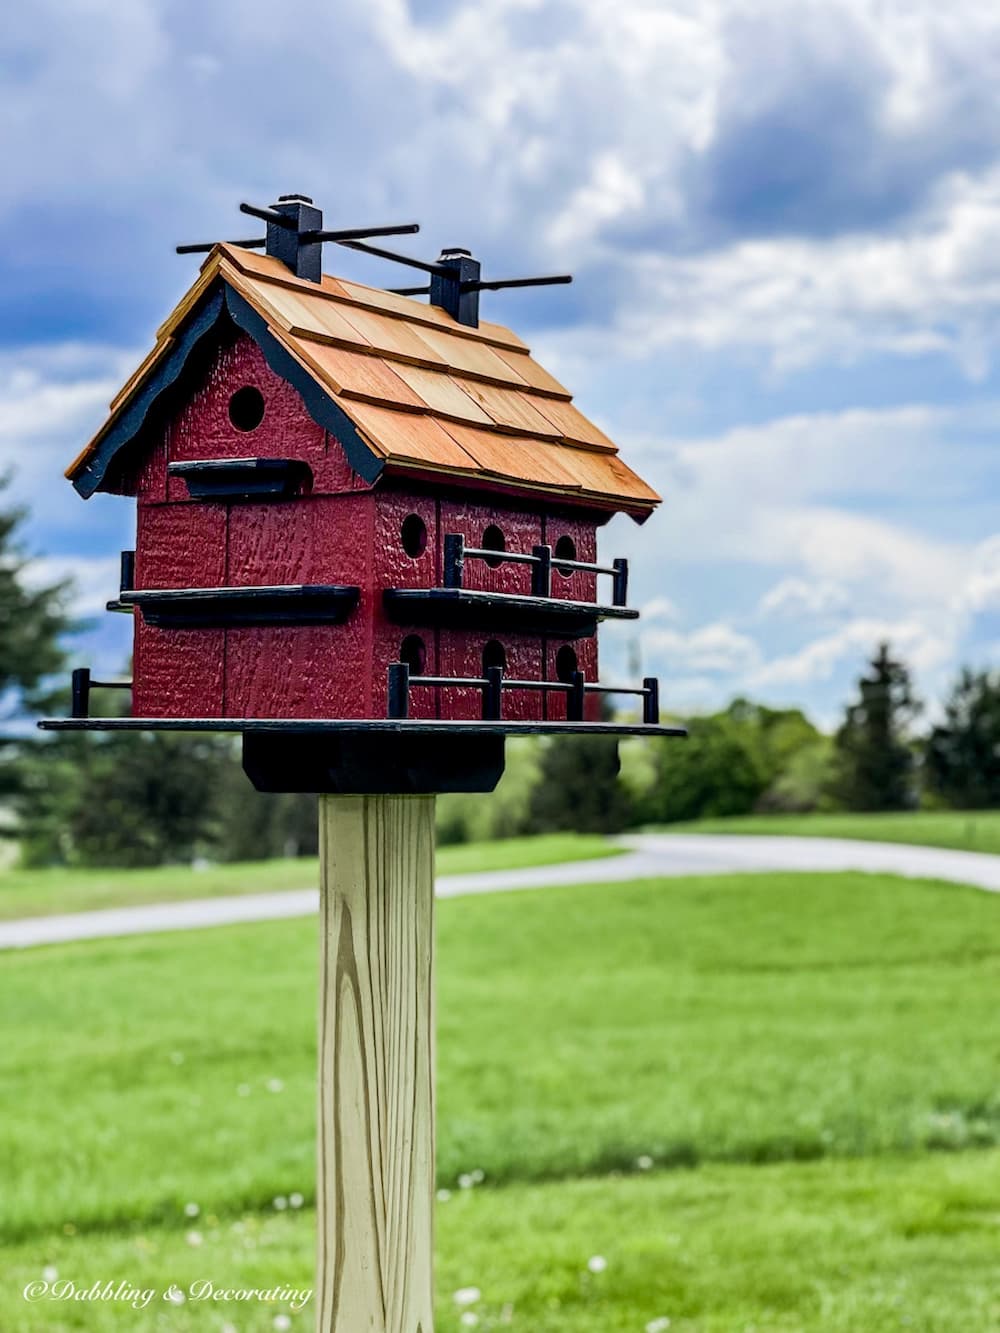 The Biggest Red Birdhouse and How to Easily Mount It